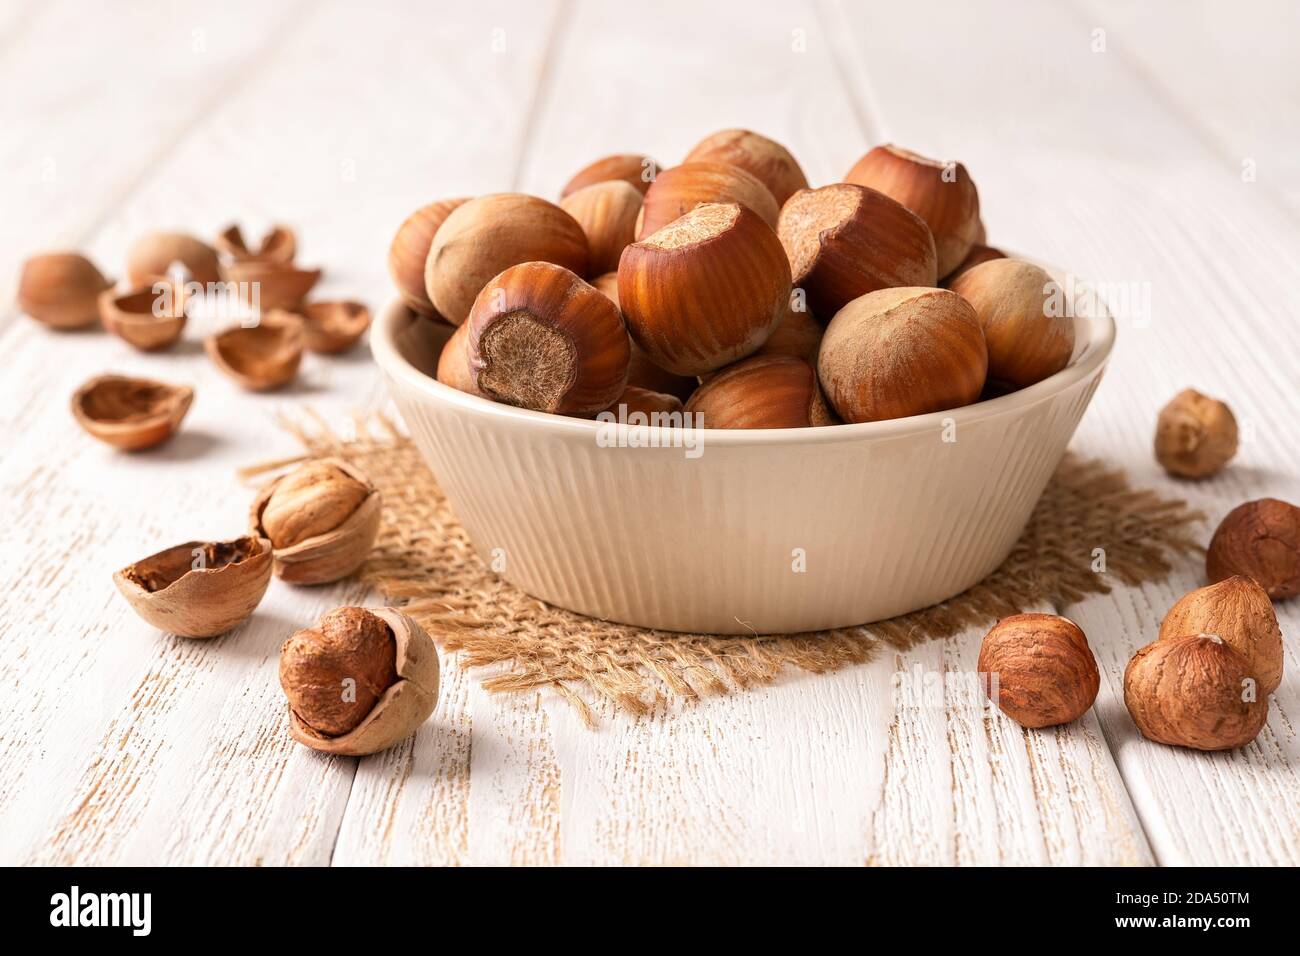 Hazelnuts in a beige ceramic bowl on a white wood table. Healthy vegetarian eating, antioxidant and protein source. Ketogenic and raw food diets. Stock Photo